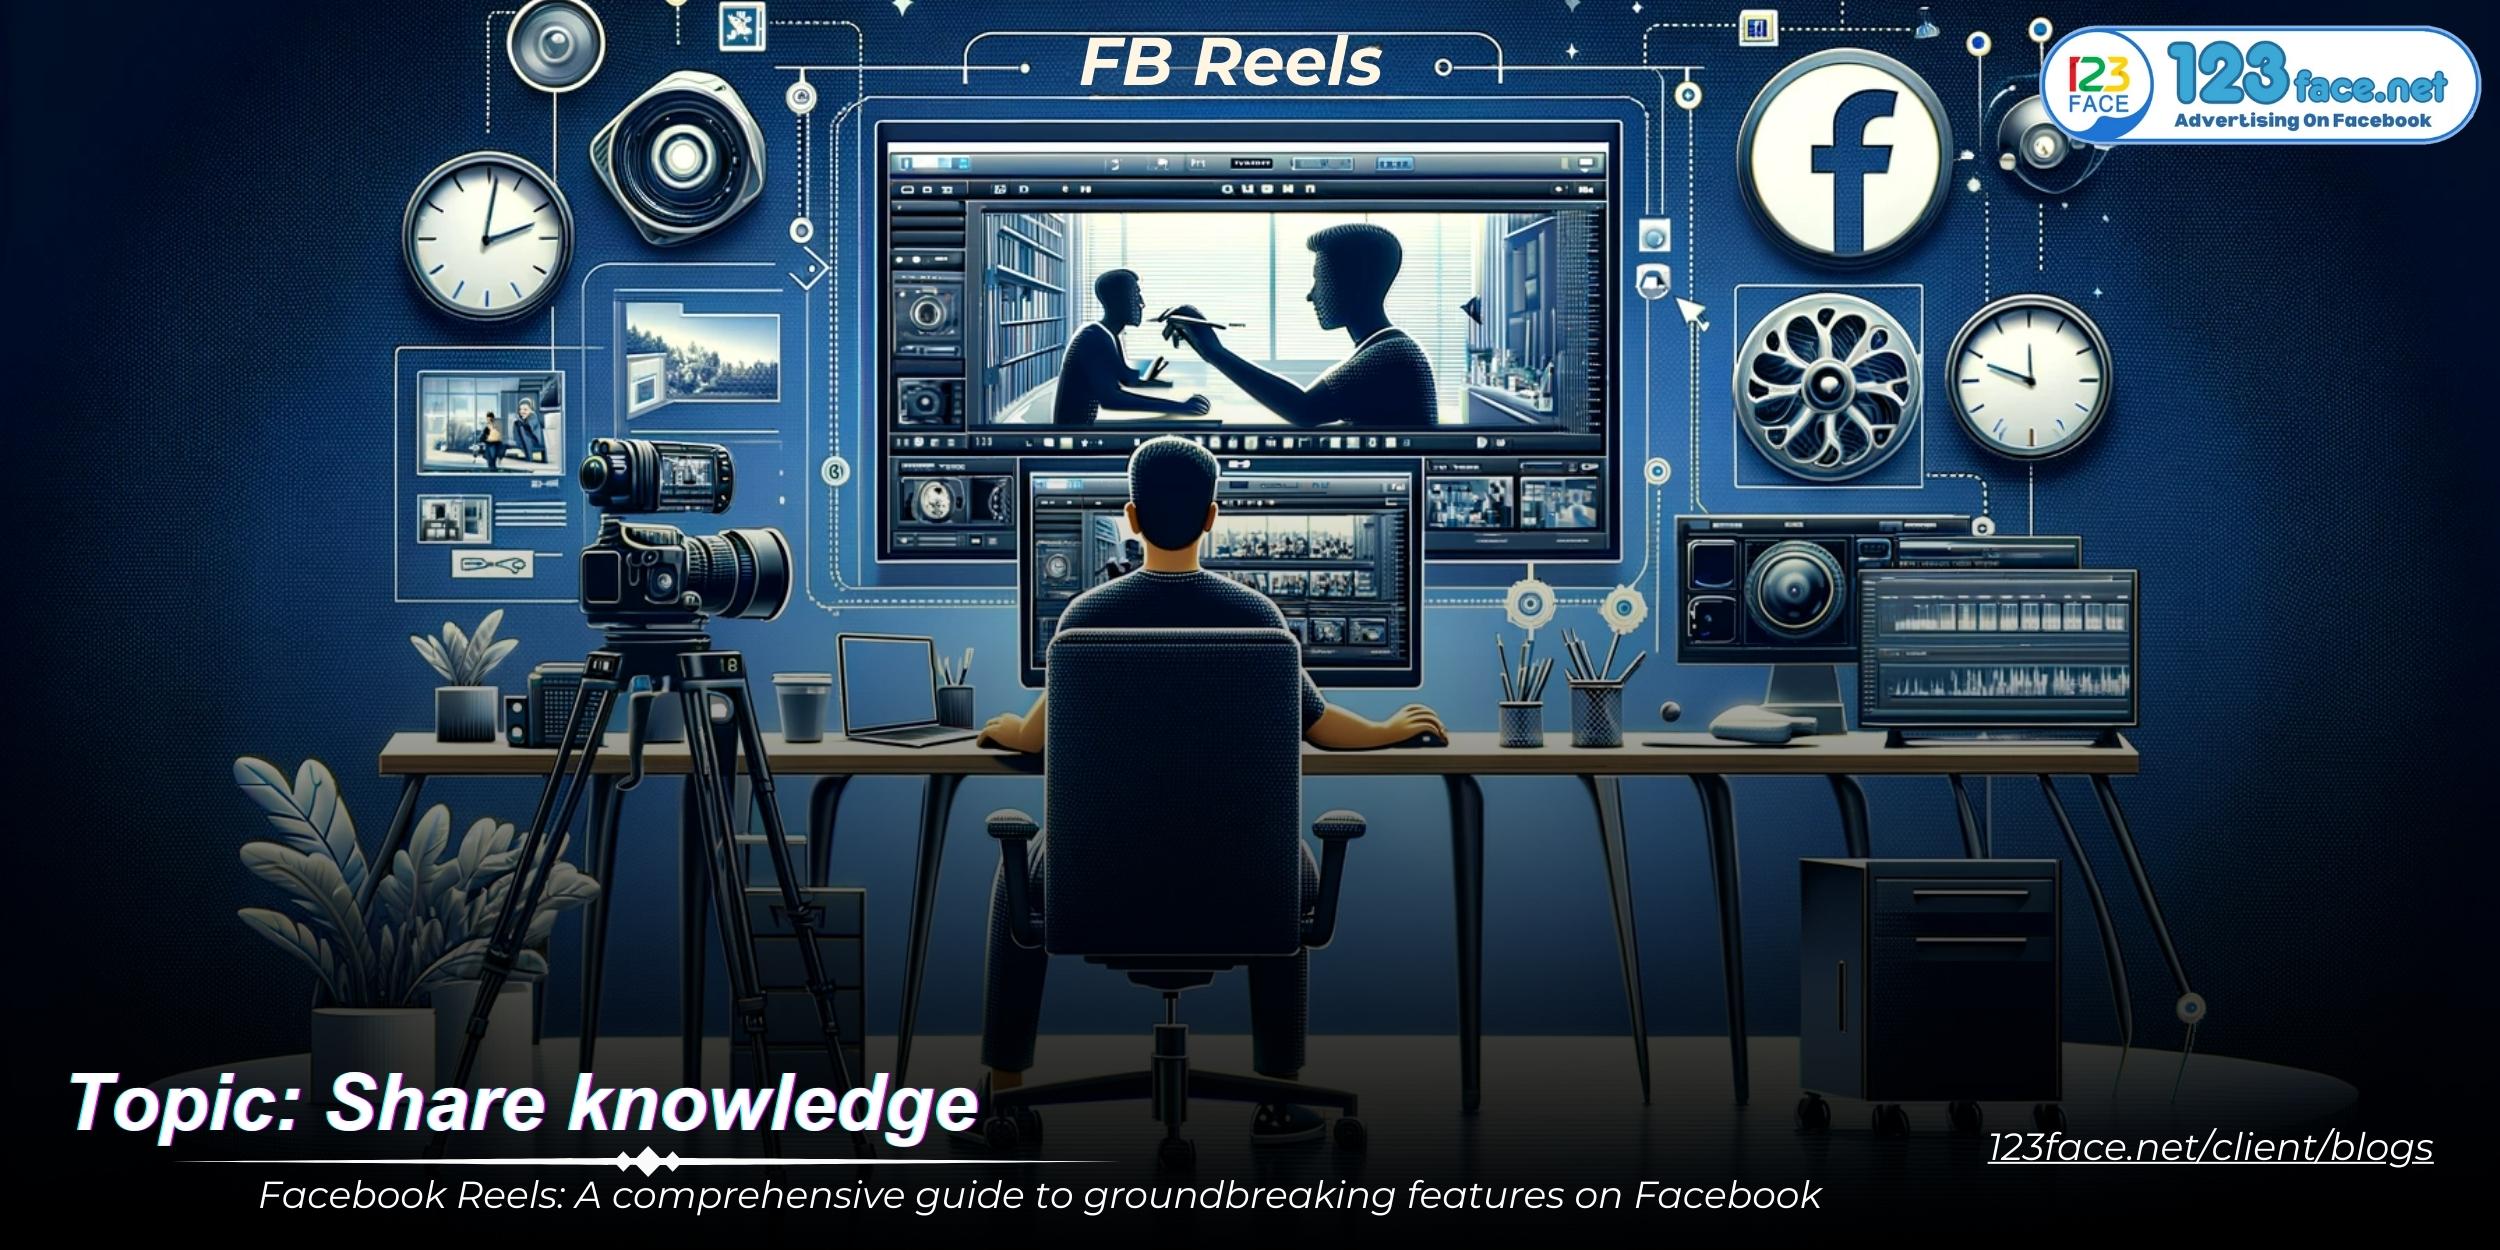 Facebook Reels: A comprehensive guide to groundbreaking features on Facebook